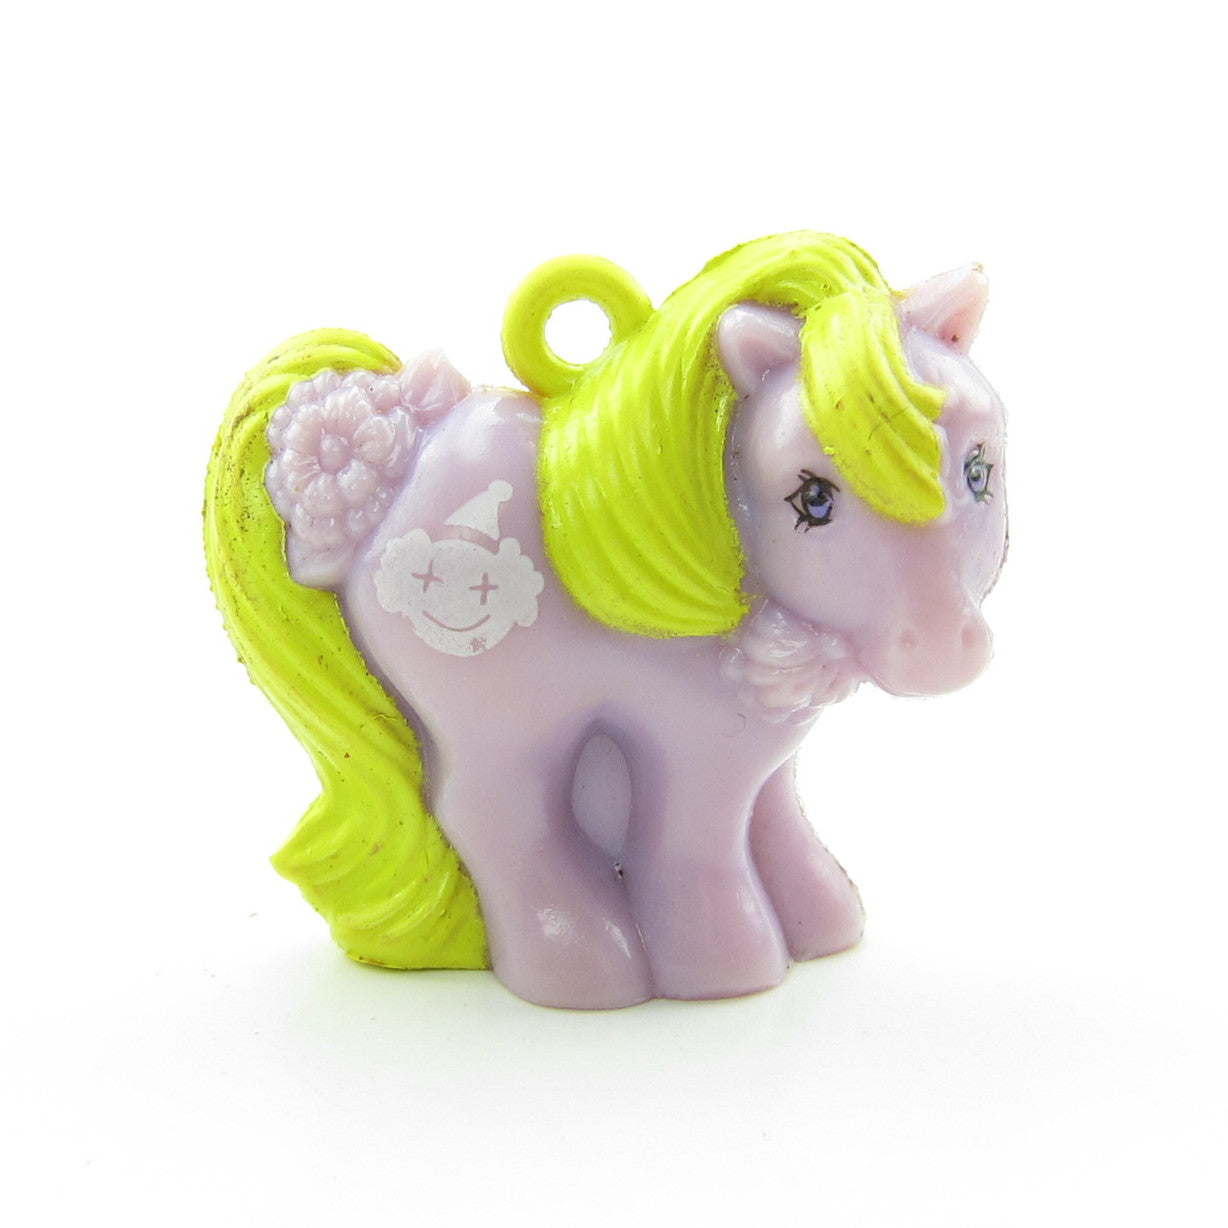 Funny Face My Little Pony mommy or mummy charm